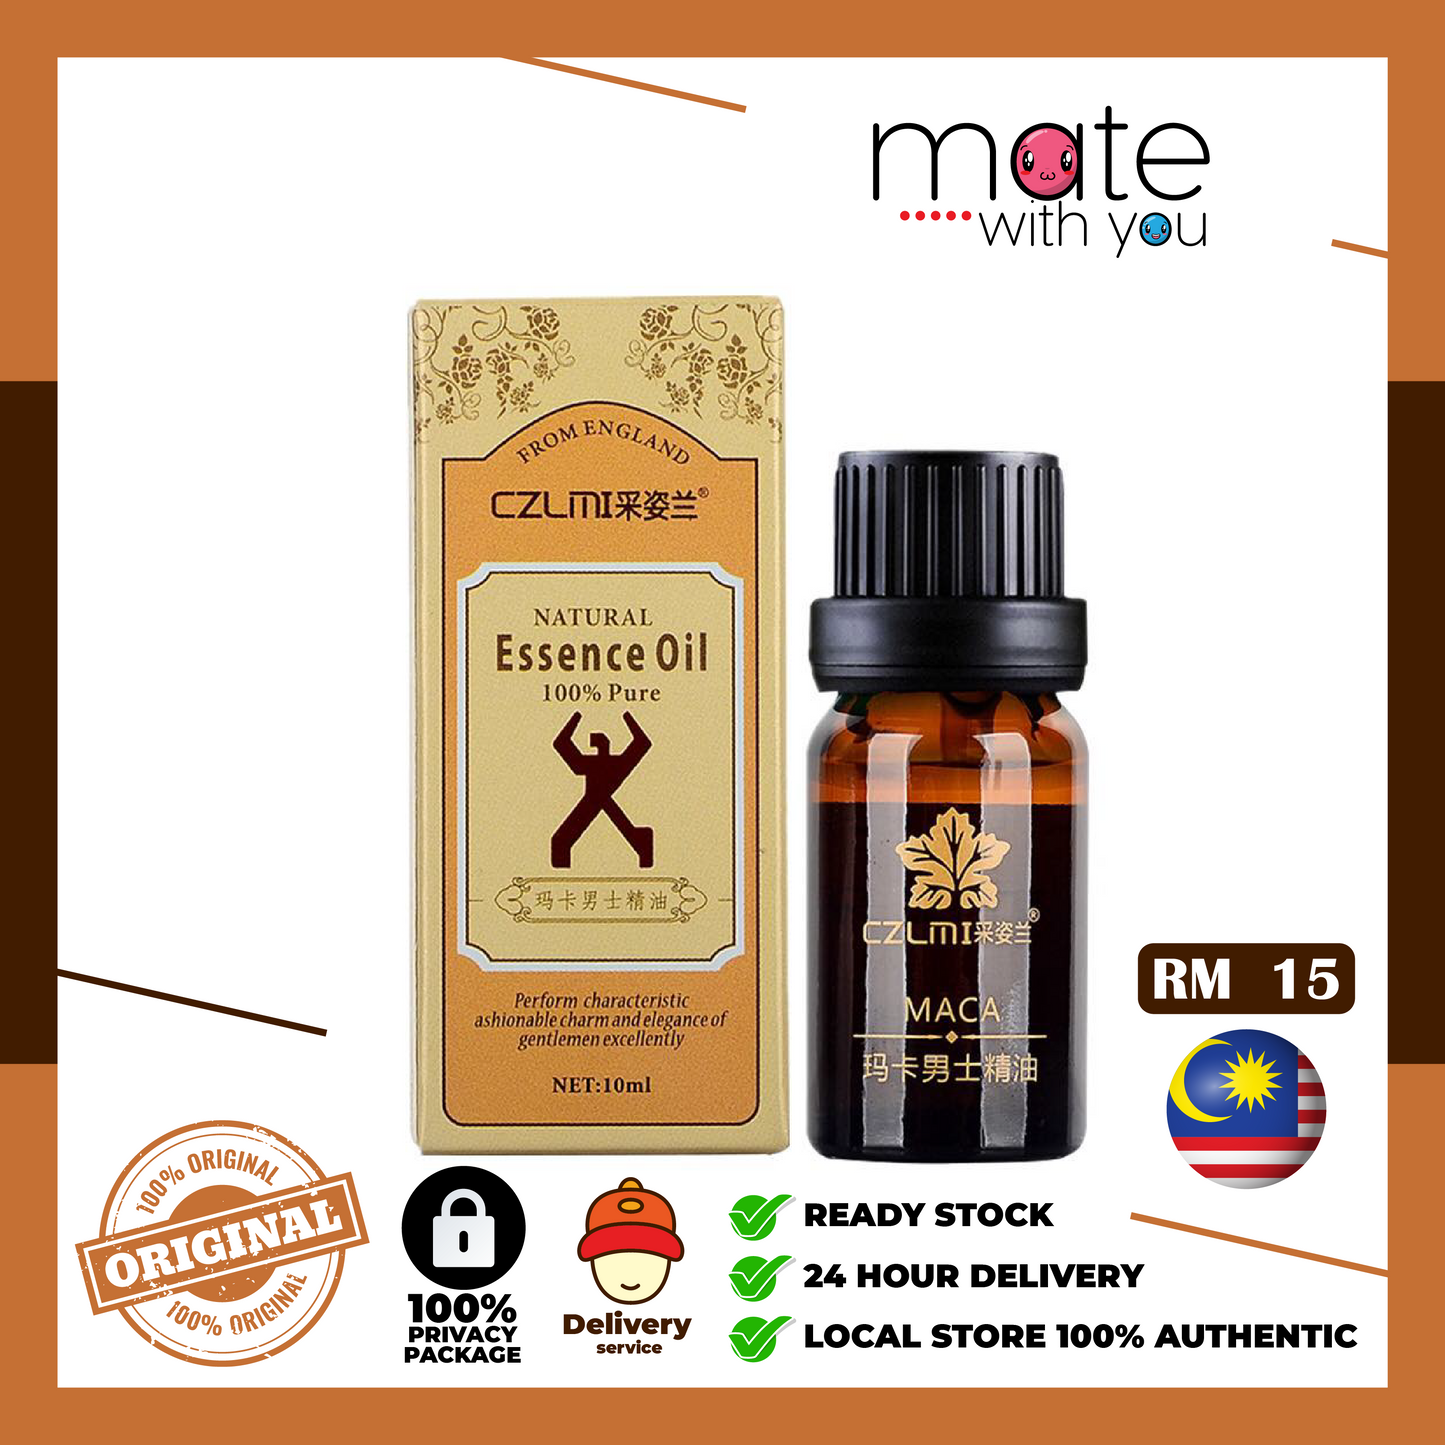 Mate With You | Ready Stock Malaysia. 100% Original, 100% privacy, 100% authentic, male/female, straight/gay, solo fun, We Selling Sex Vibrator, Dildo, Masturbator, Vacuum Pump, Silicone Ring.MACA OIL CZLMI Men Enlarge Penis Oil Minyak Zakar Sex Delay Growth Extension Essential Oil Tahan Lama Natural Herbal Oil